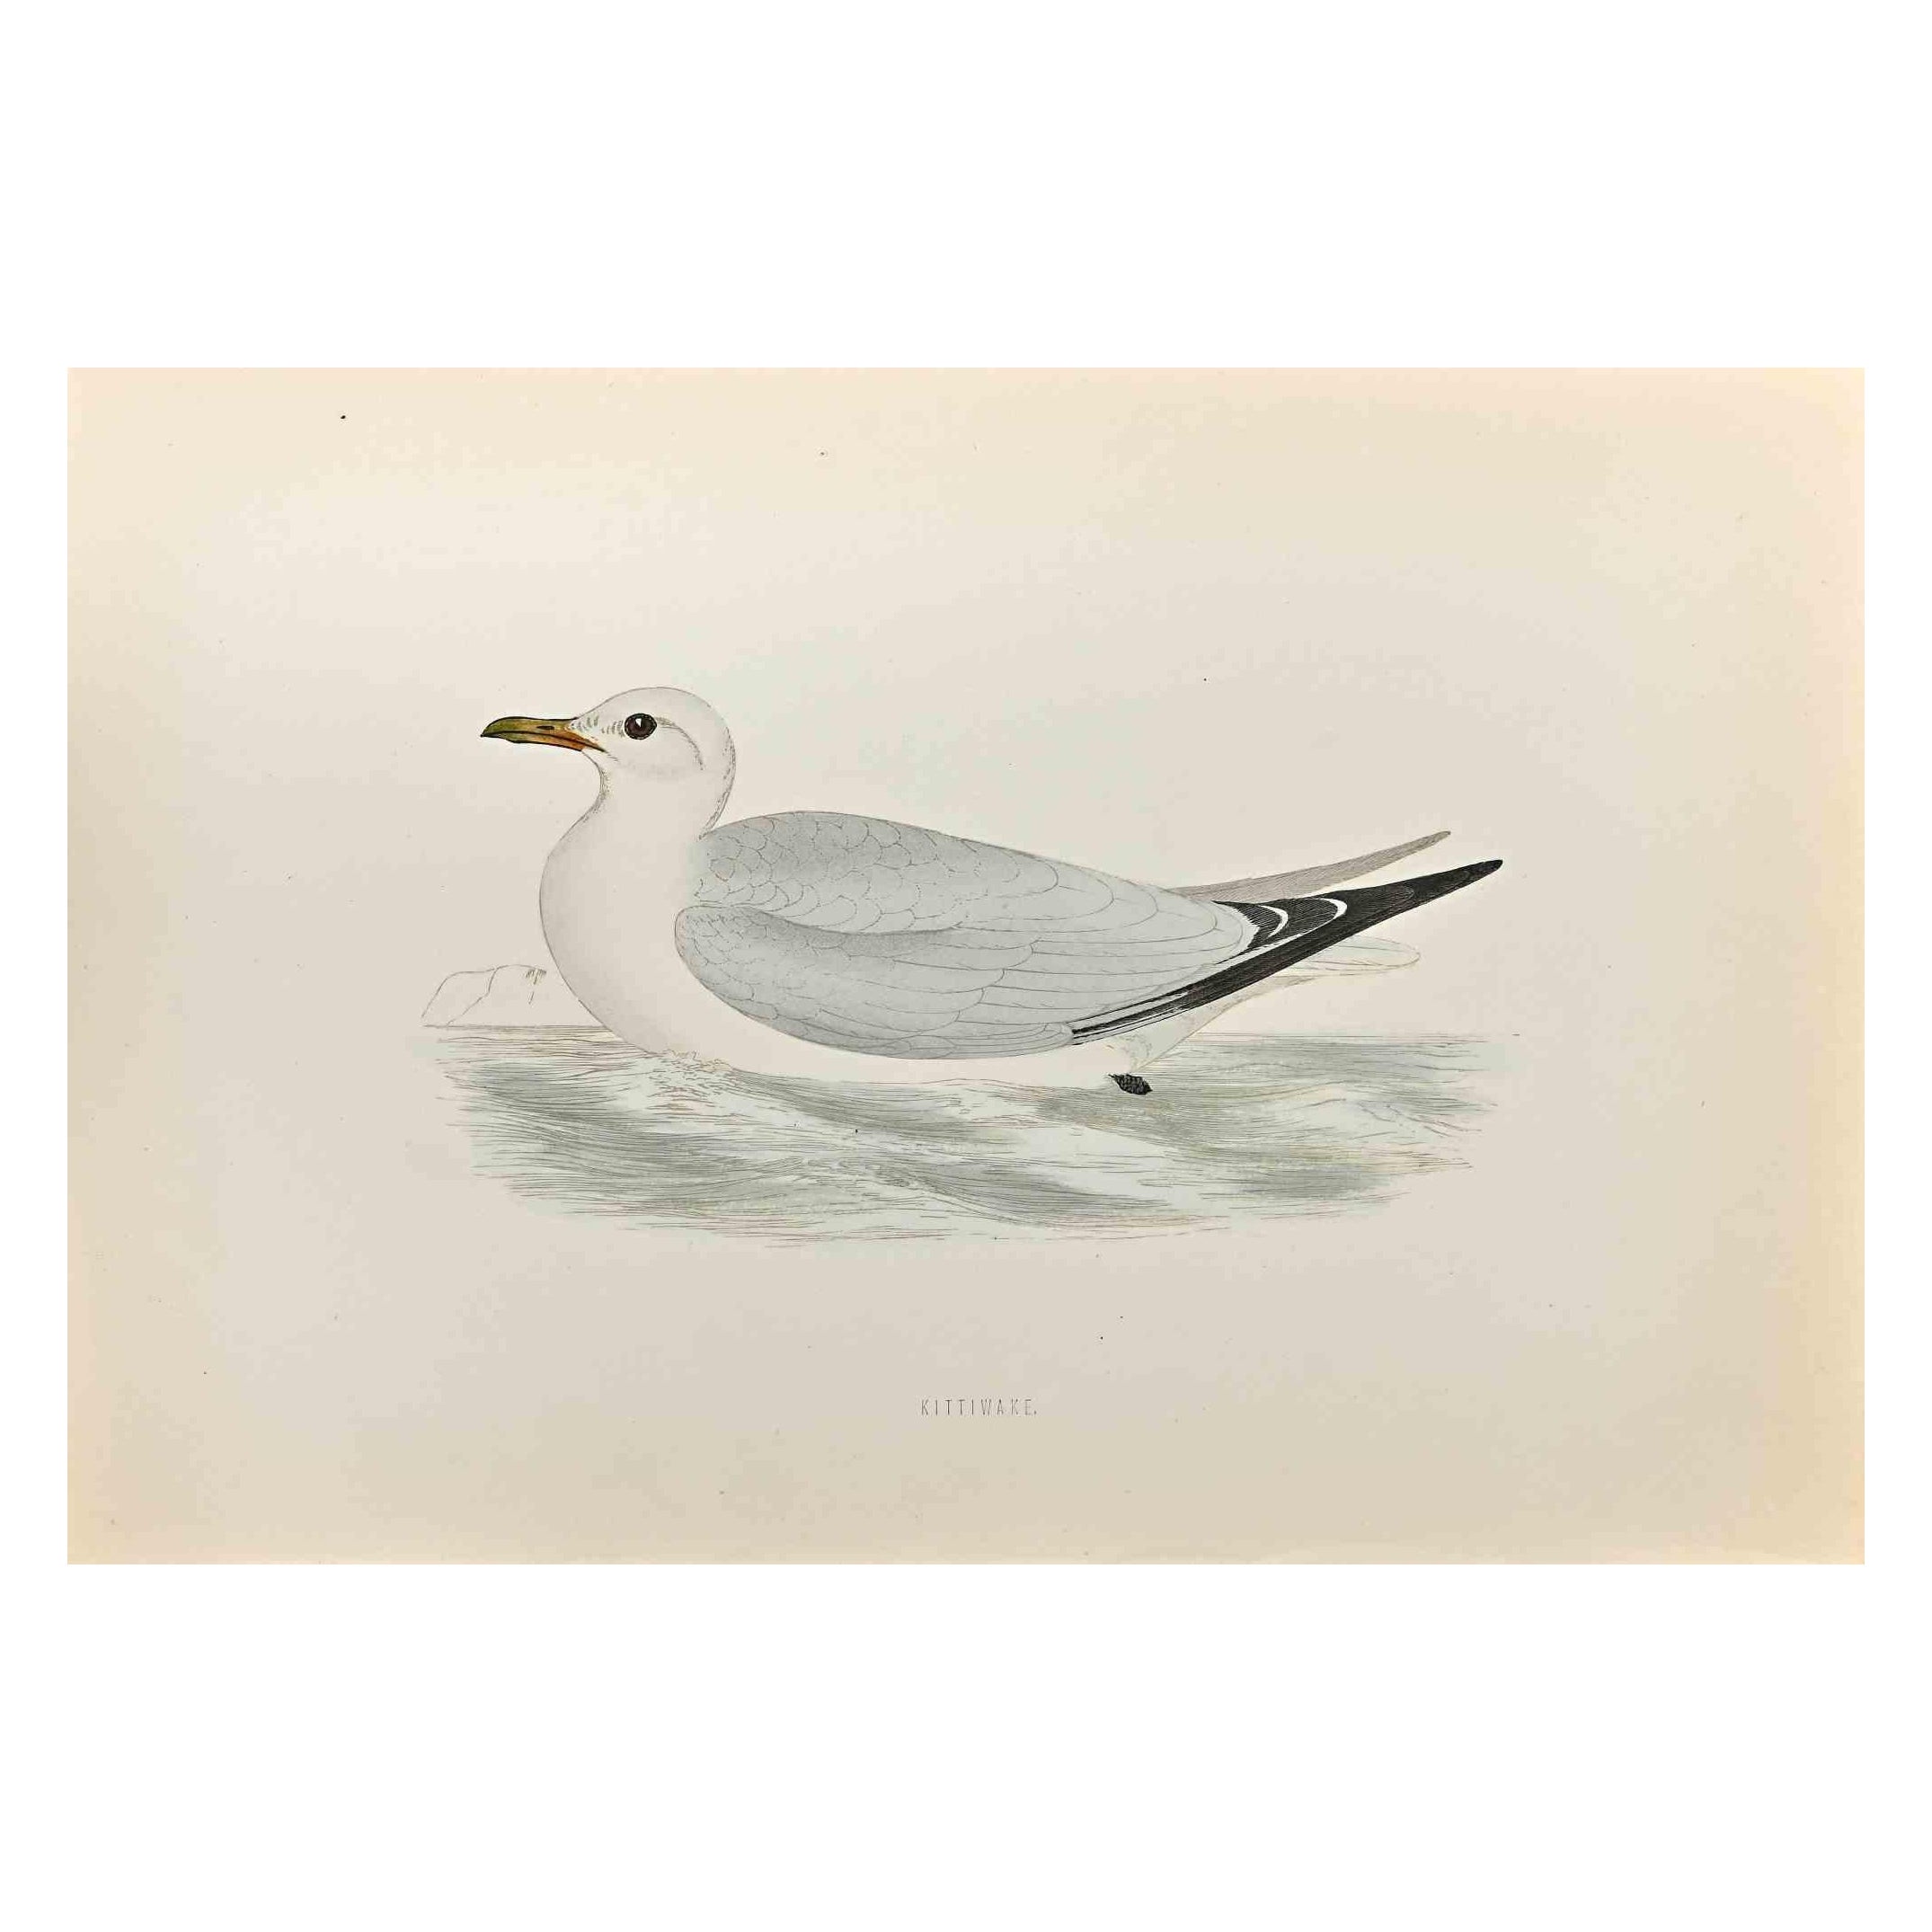 Kittiwake is a modern artwork realized in 1870 by the British artist Alexander Francis Lydon (1836-1917).

Woodcut print on ivory-colored paper.

Hand-colored, published by London, Bell & Sons, 1870.  

The name of the bird is printed on the plate.